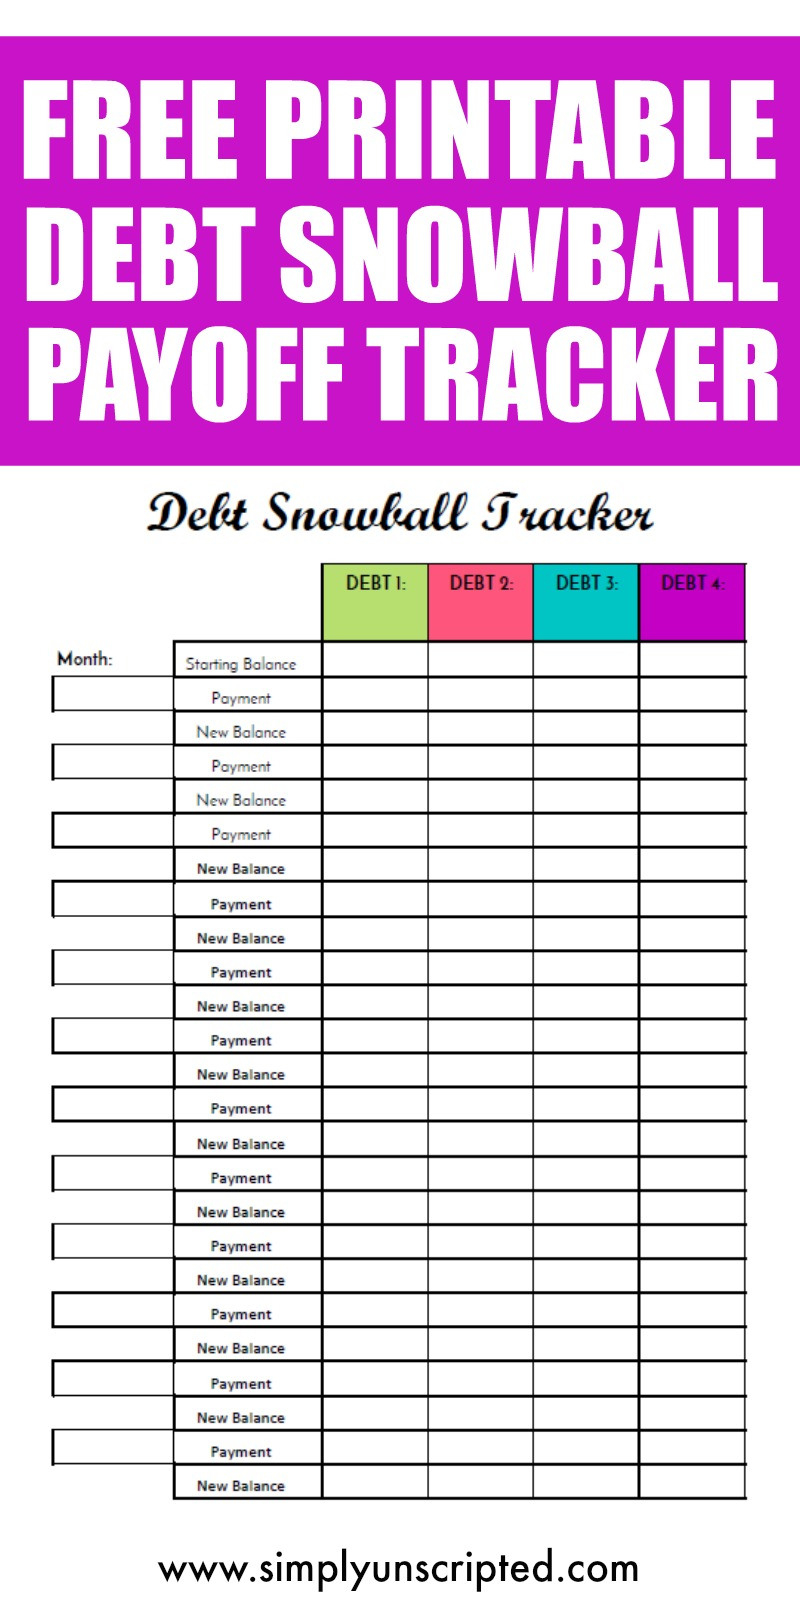 free-debt-snowball-tracker-printable-simply-unscripted-db-excel